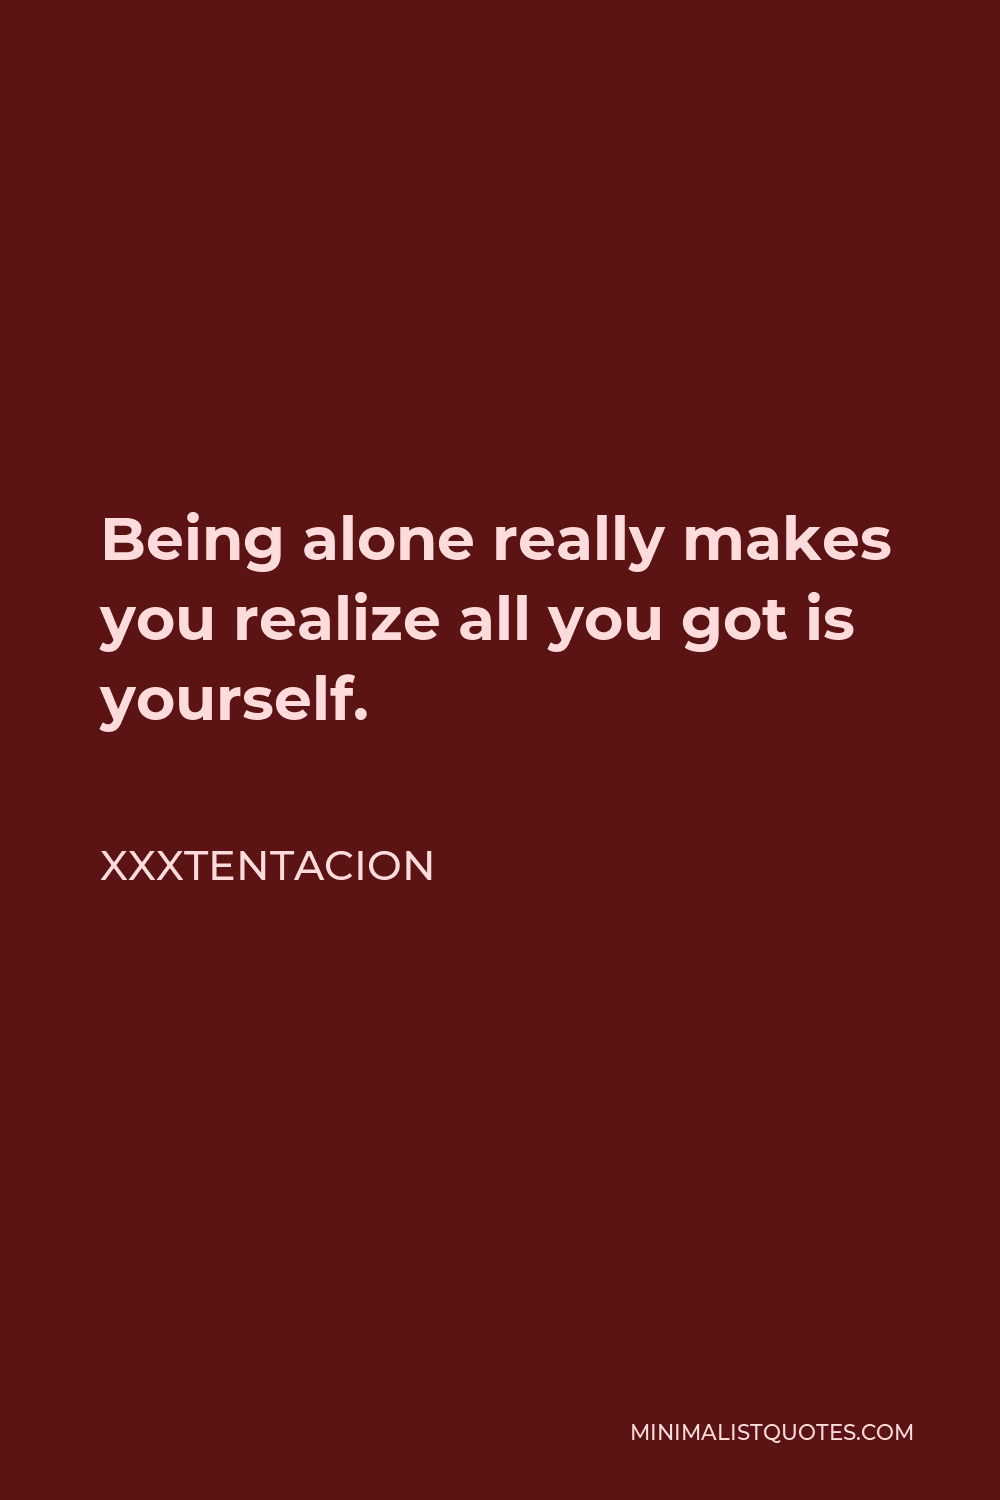 Xxxtentacion Quote - Being alone really makes you realize all you got is yourself.